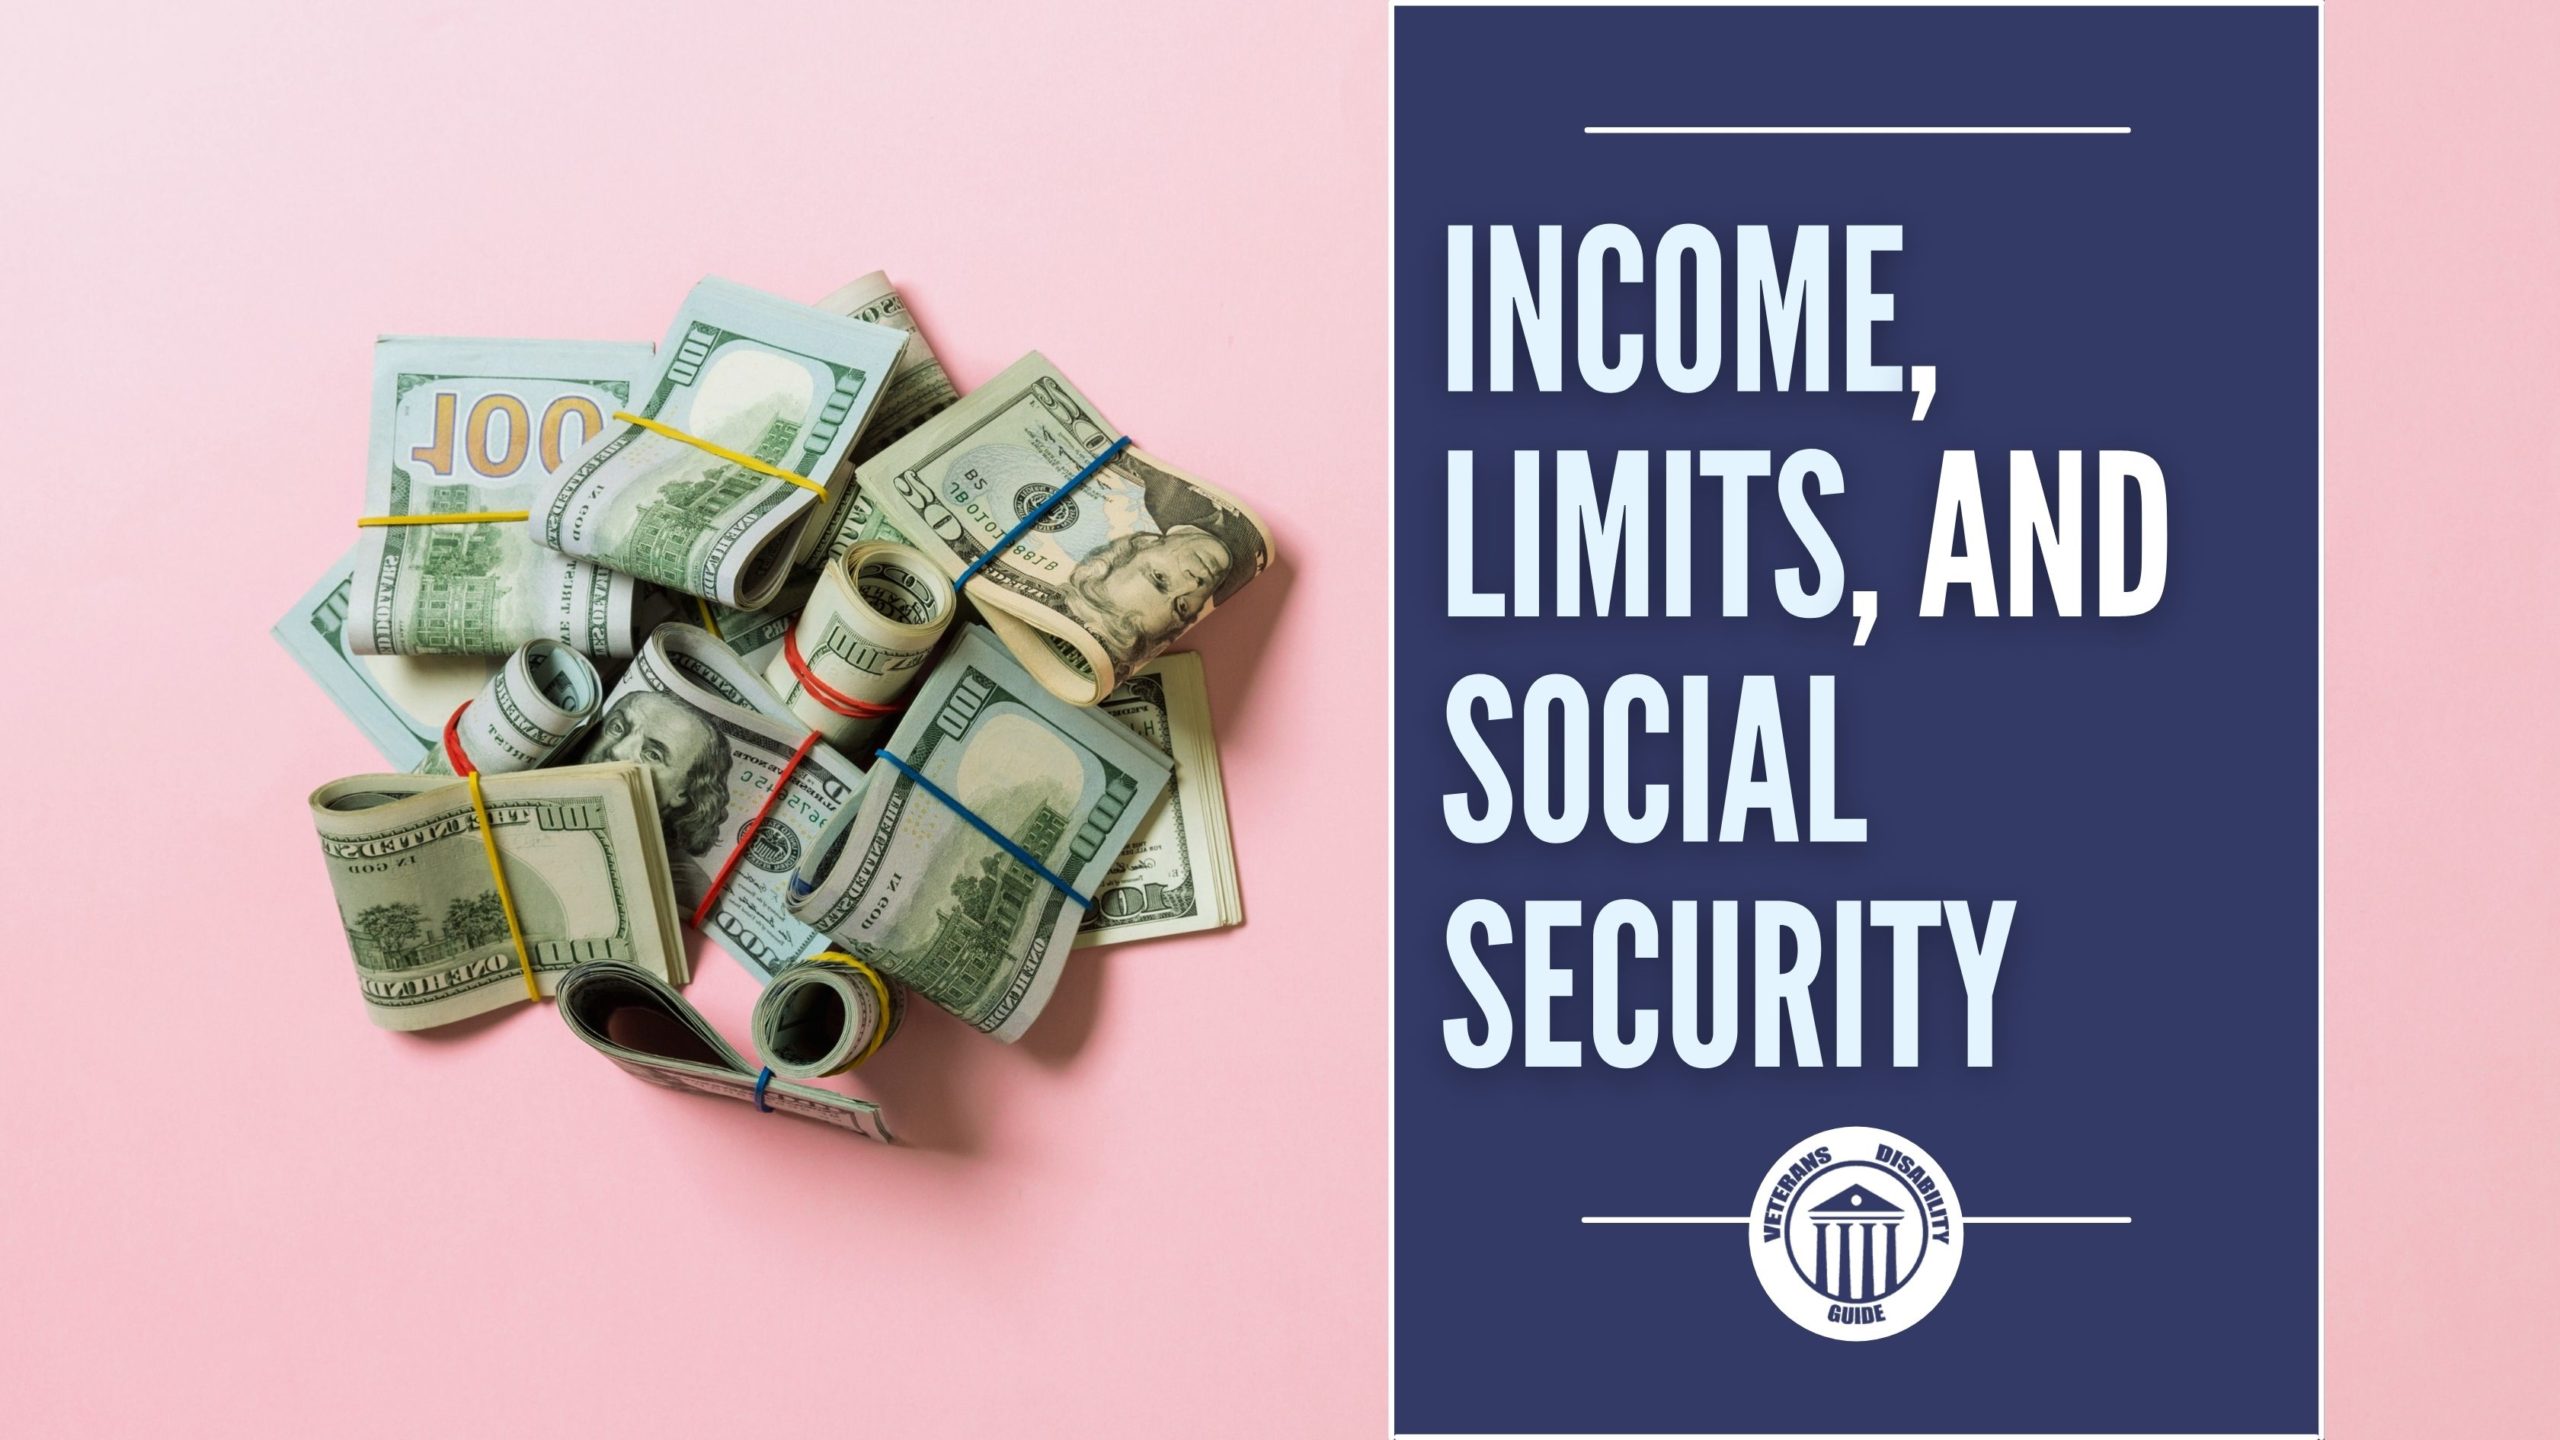 Income, Limits, And Social Security blog header image